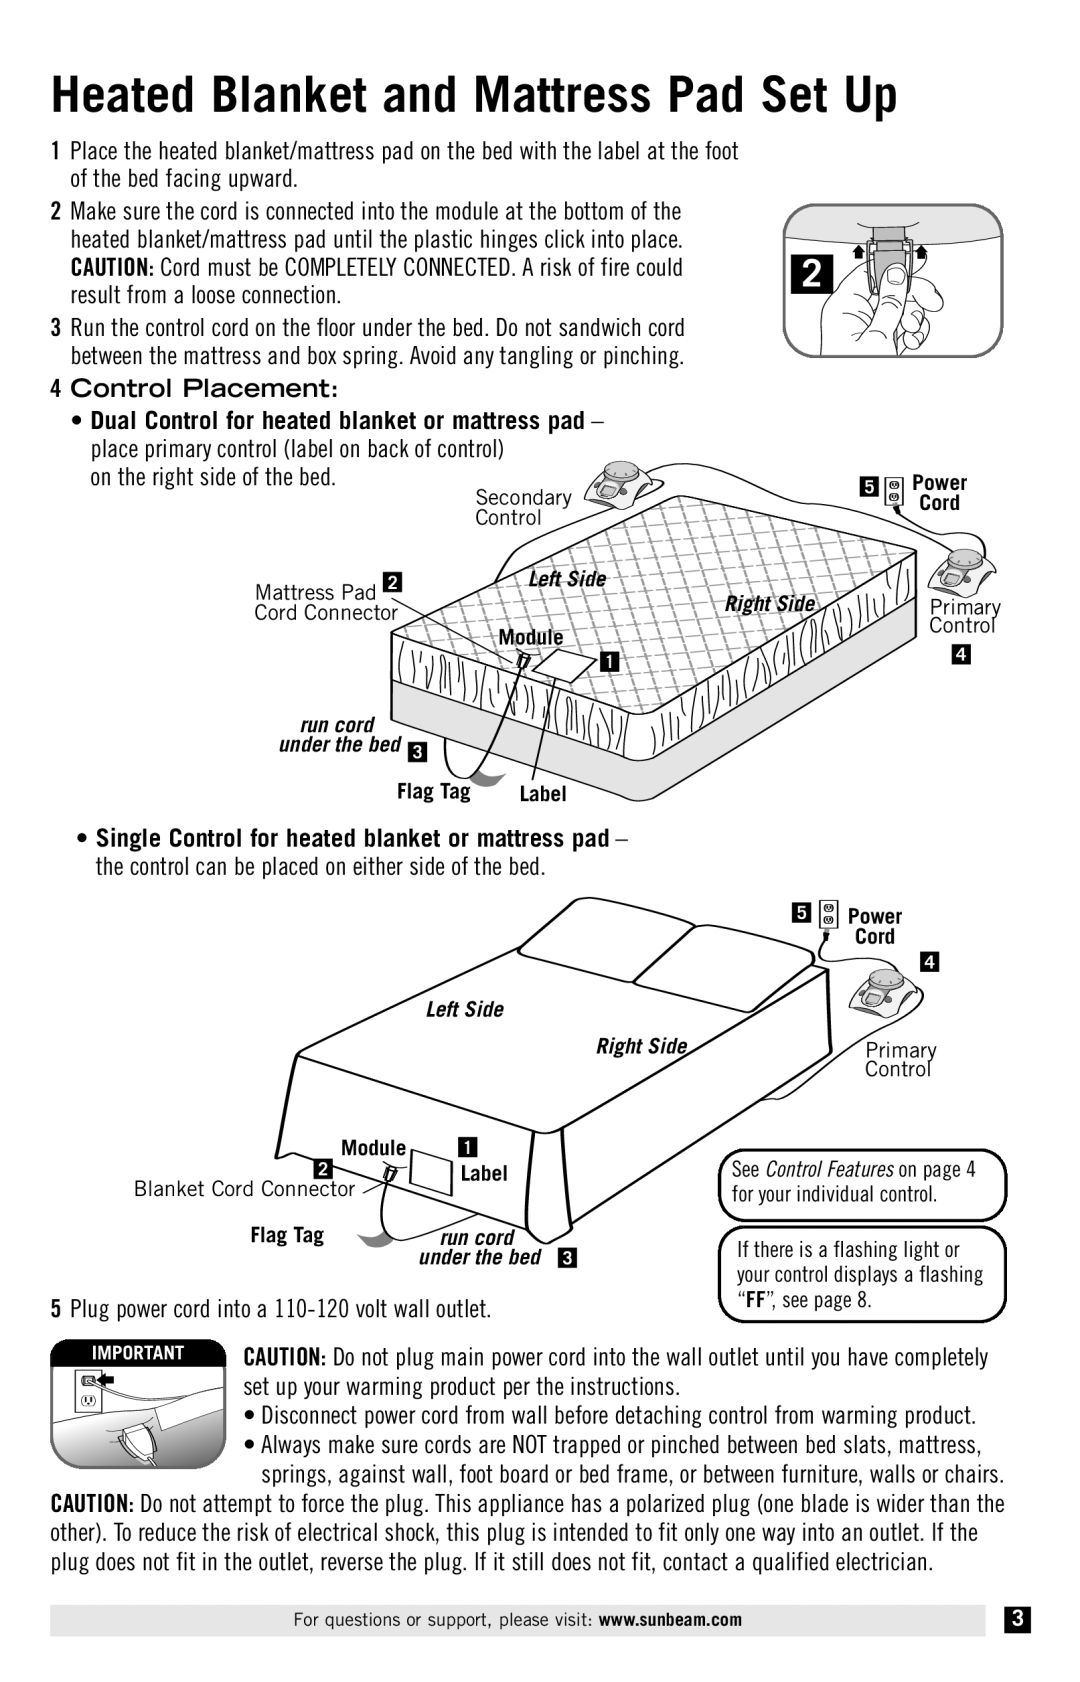 Sunbeam Electric Heater manual Heated Blanket and Mattress Pad Set Up, result from a loose connection, 4Control Placement 